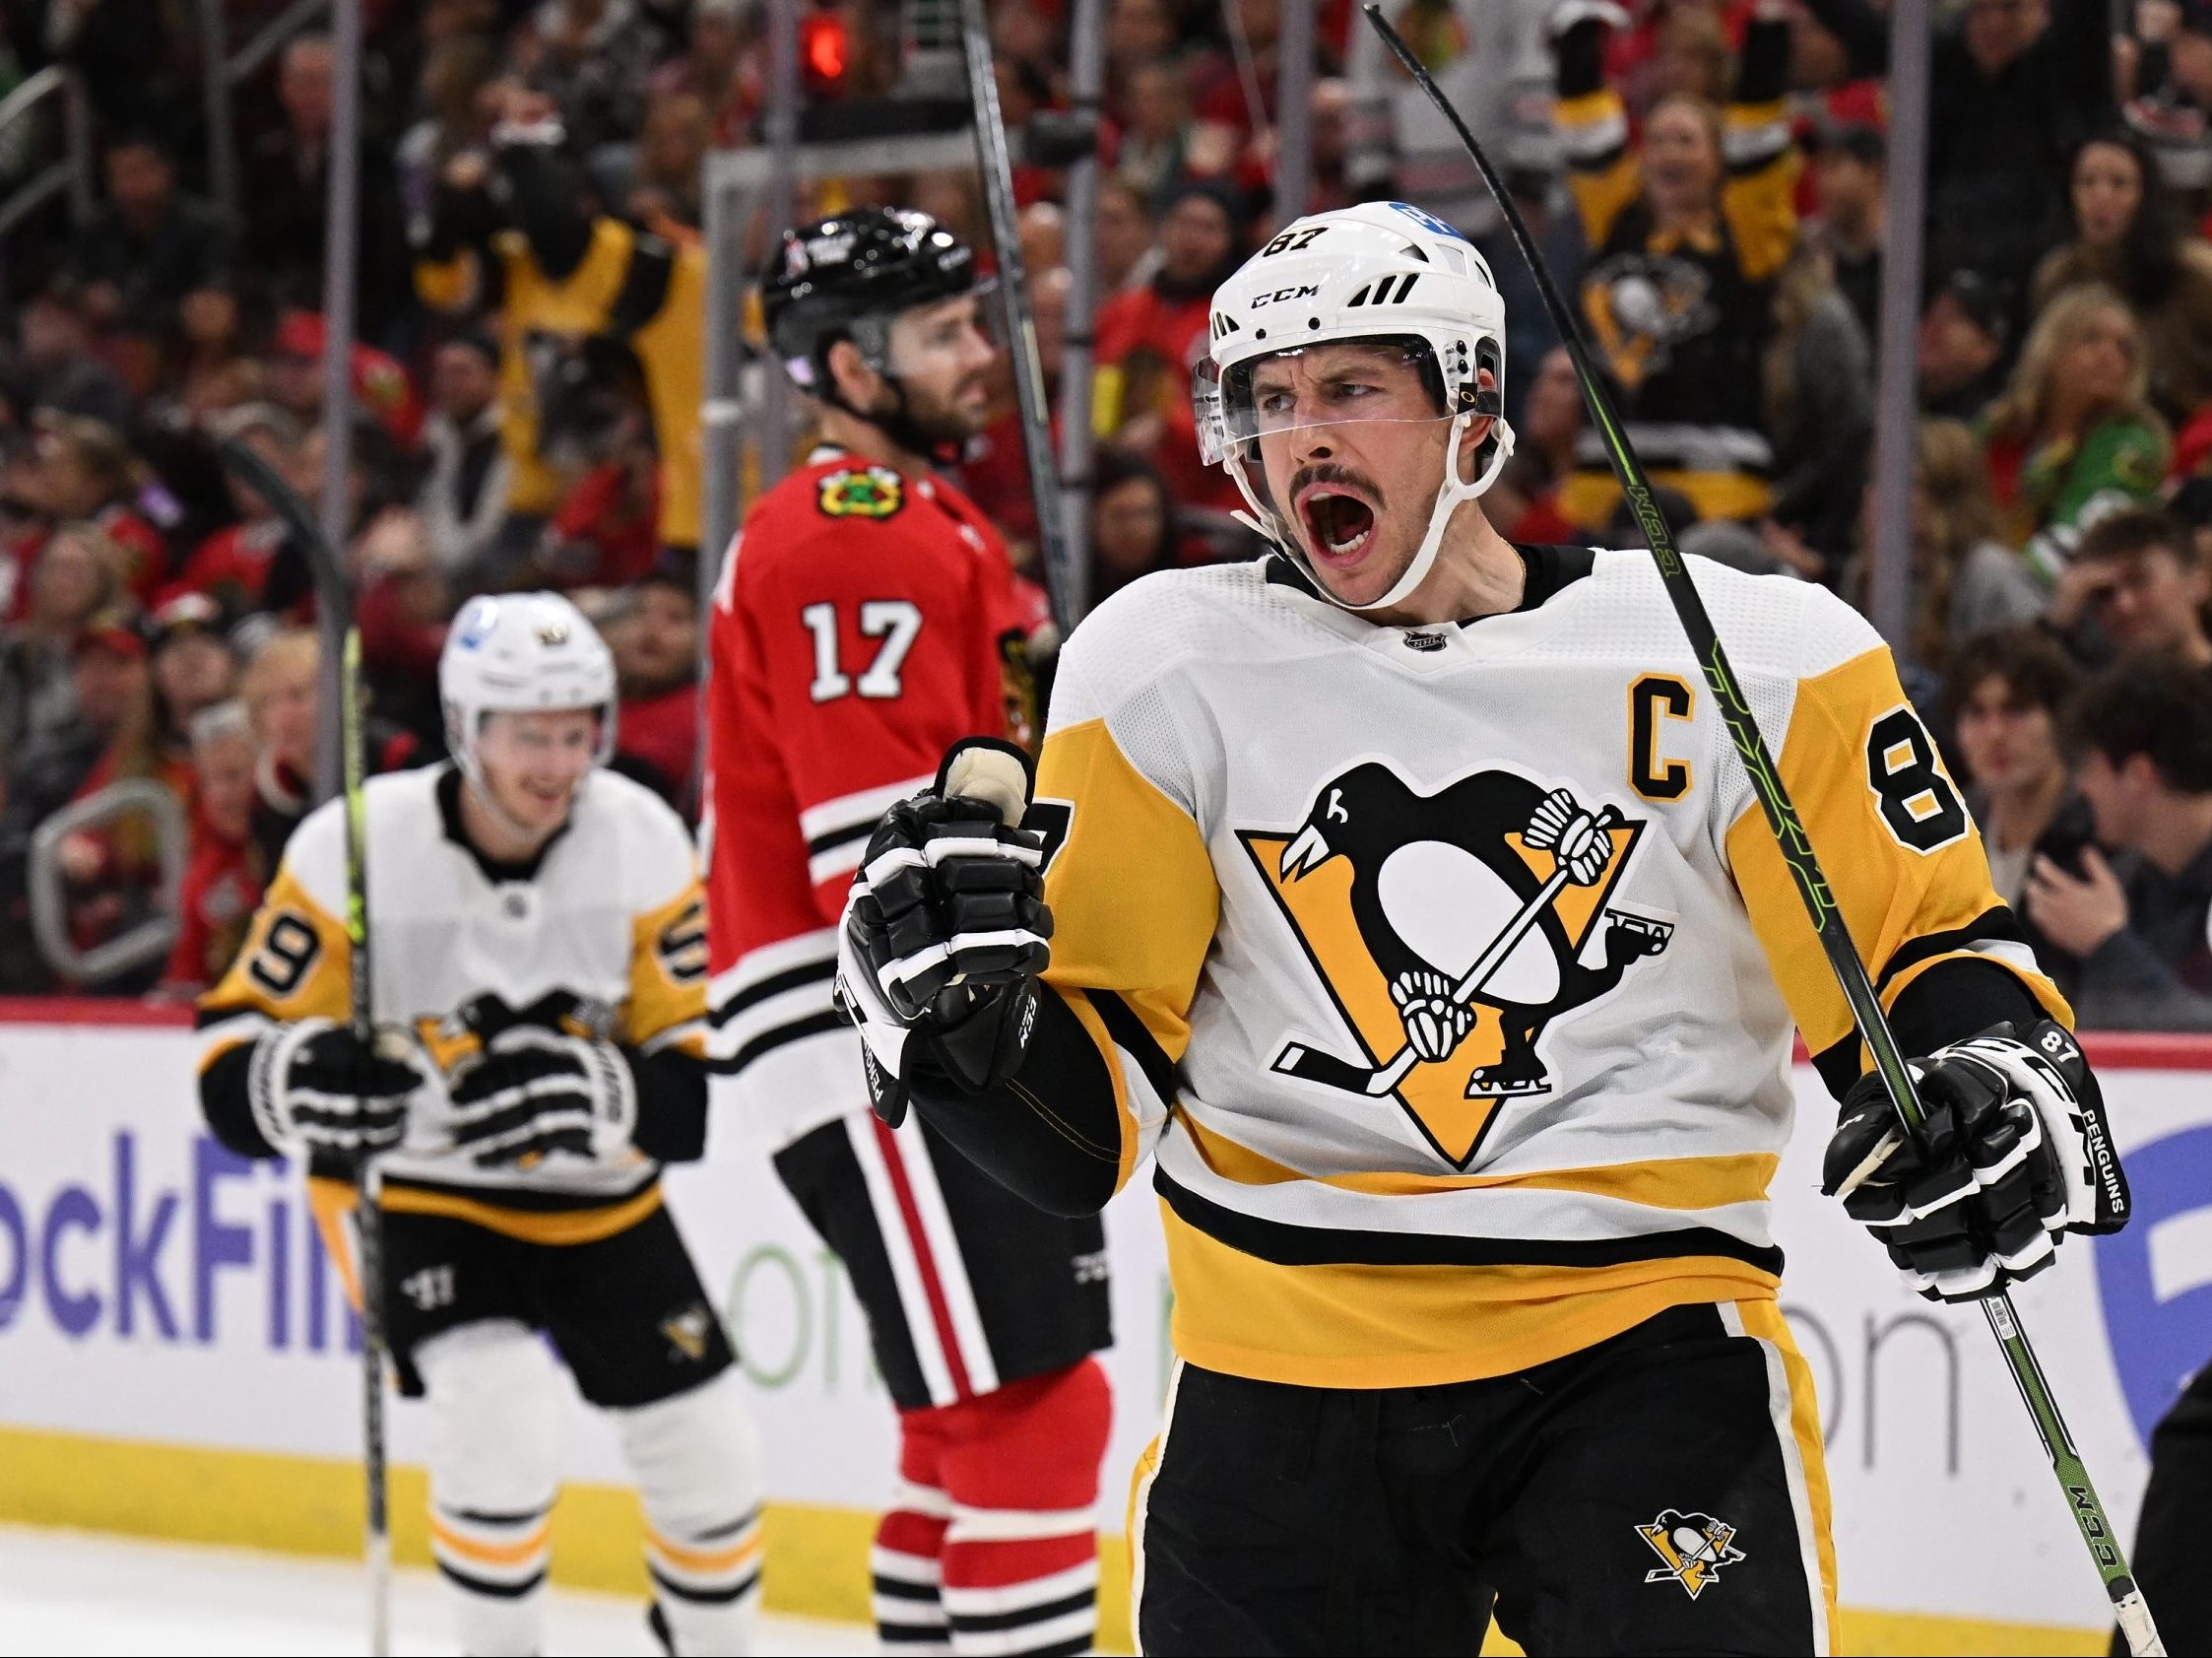 Even with what Crosby is doing, the Penguins remain a long shot to win one more Stanley Cup2